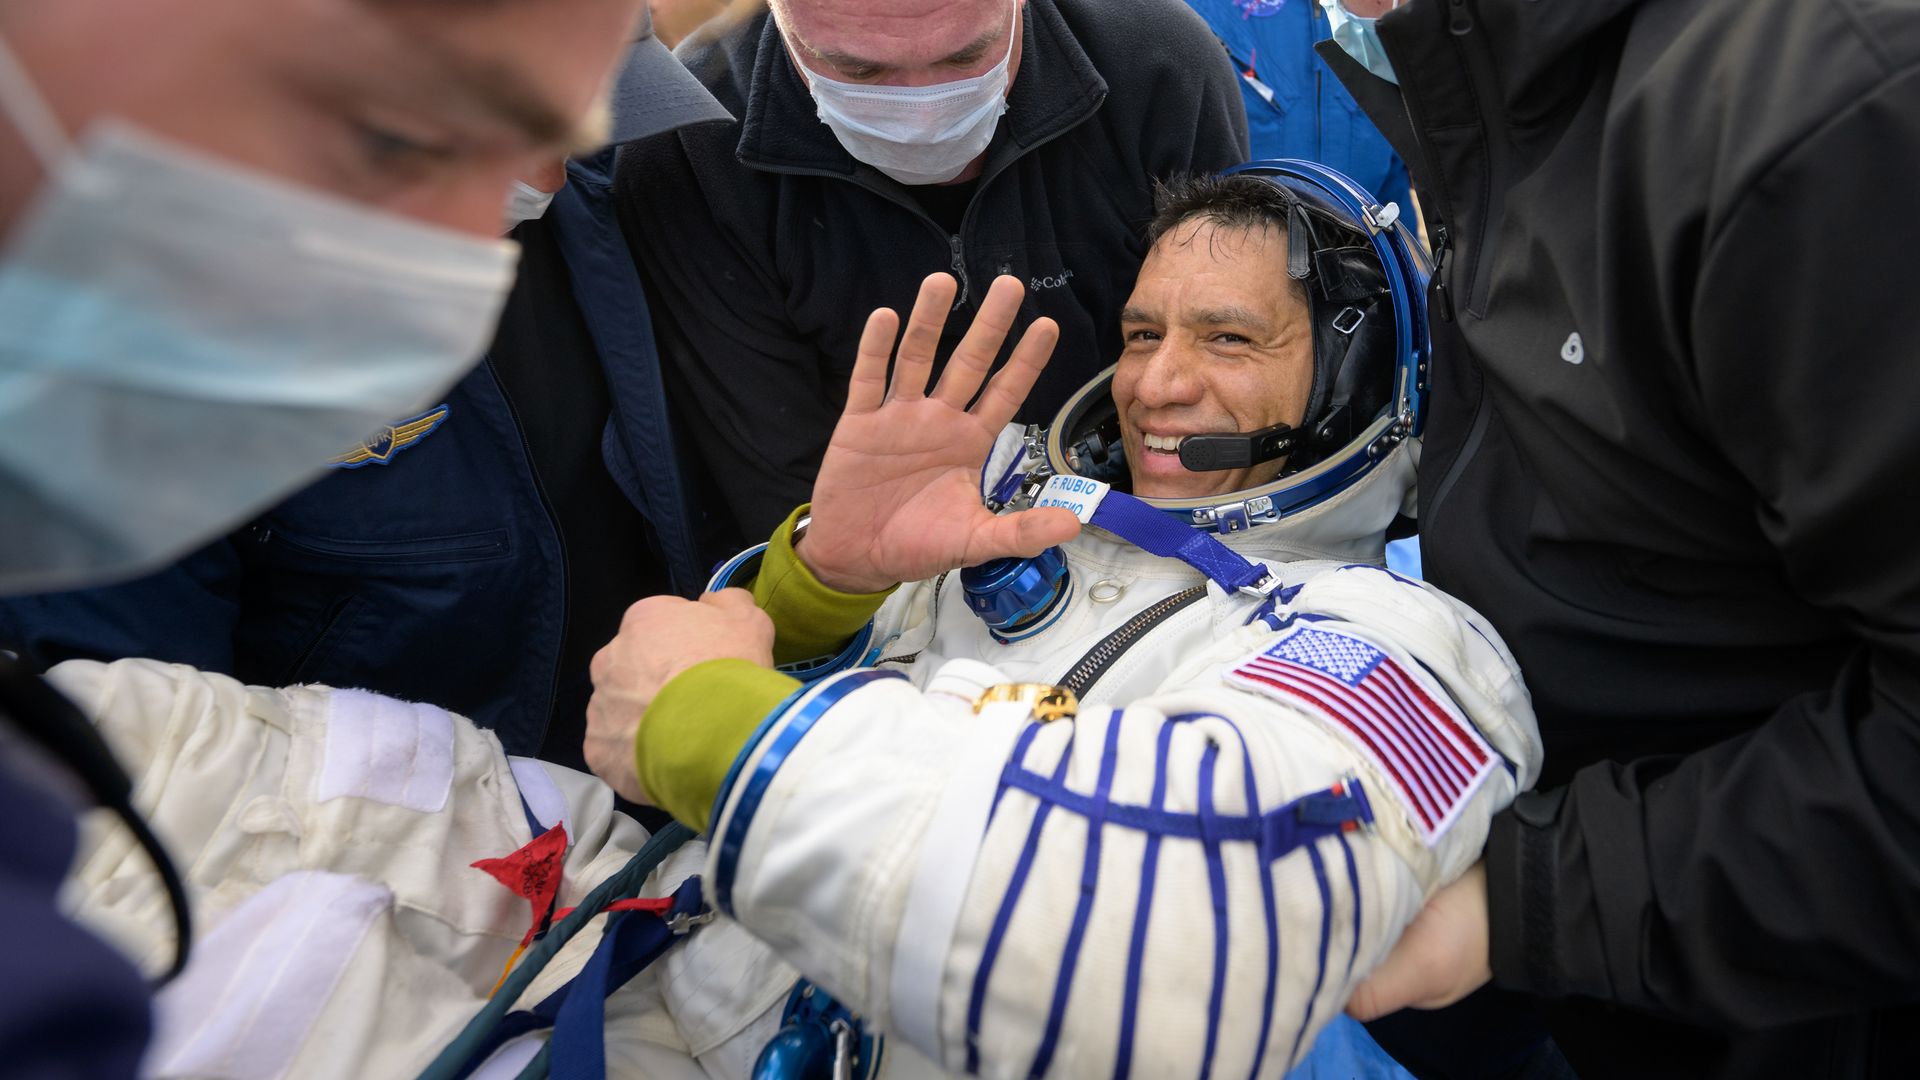 NASA astronaut Frank Rubio after landing in Kazakhstan and waving to the camera smiling while being carried to the medical tent